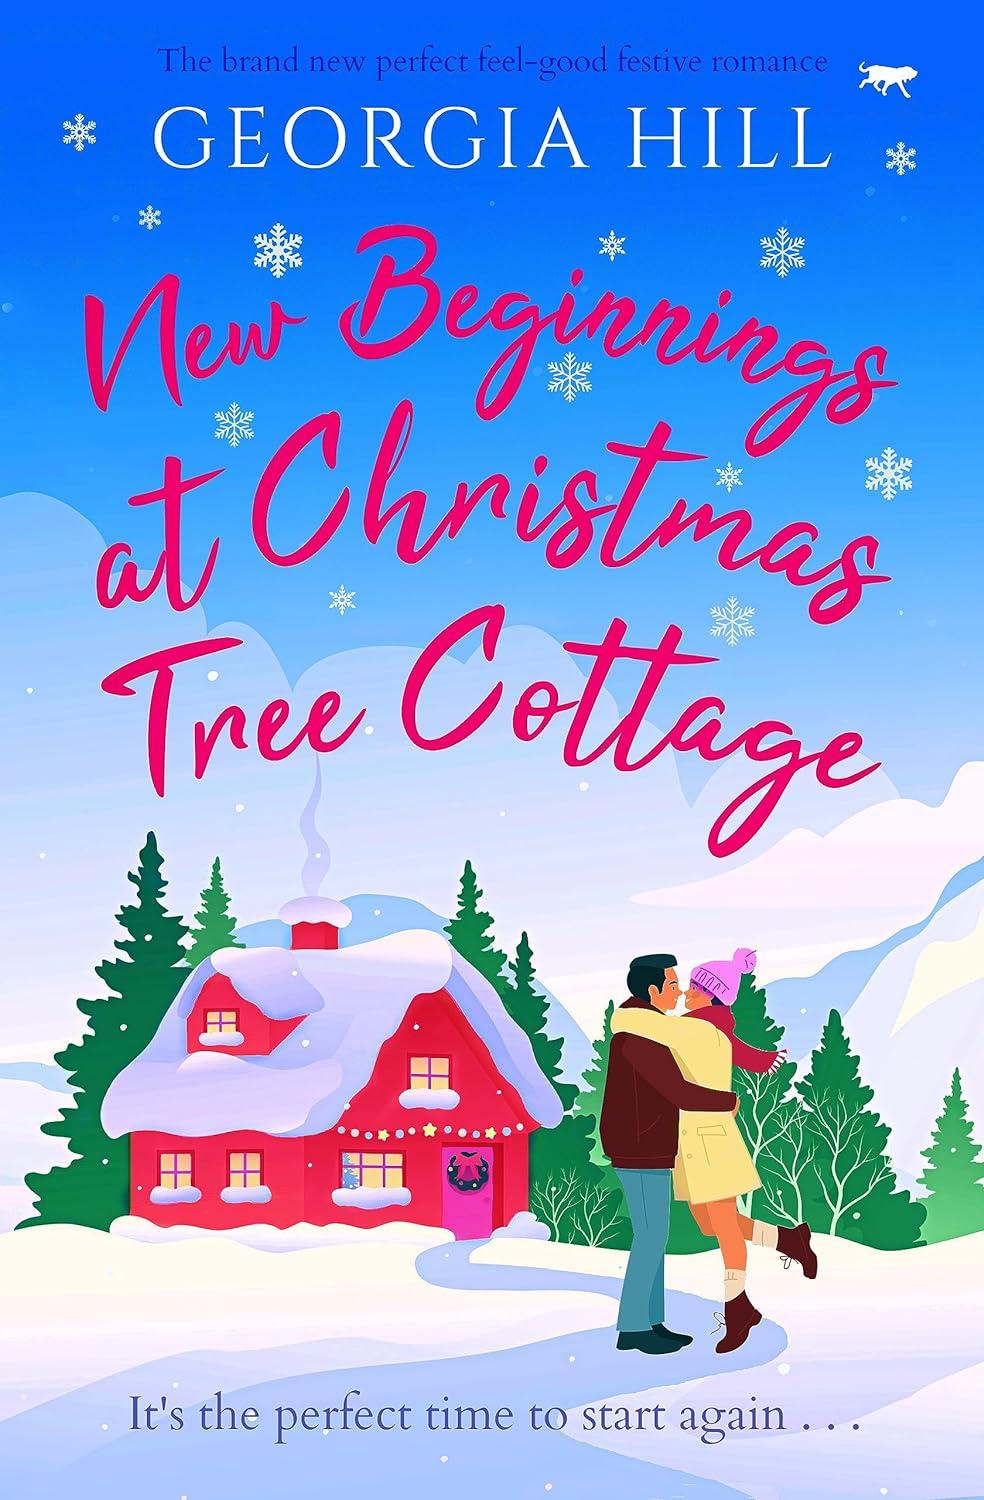 NEW BEGINNINGS AT CHRISTMAS TREE COTTAGE BY GEORGIA HILL